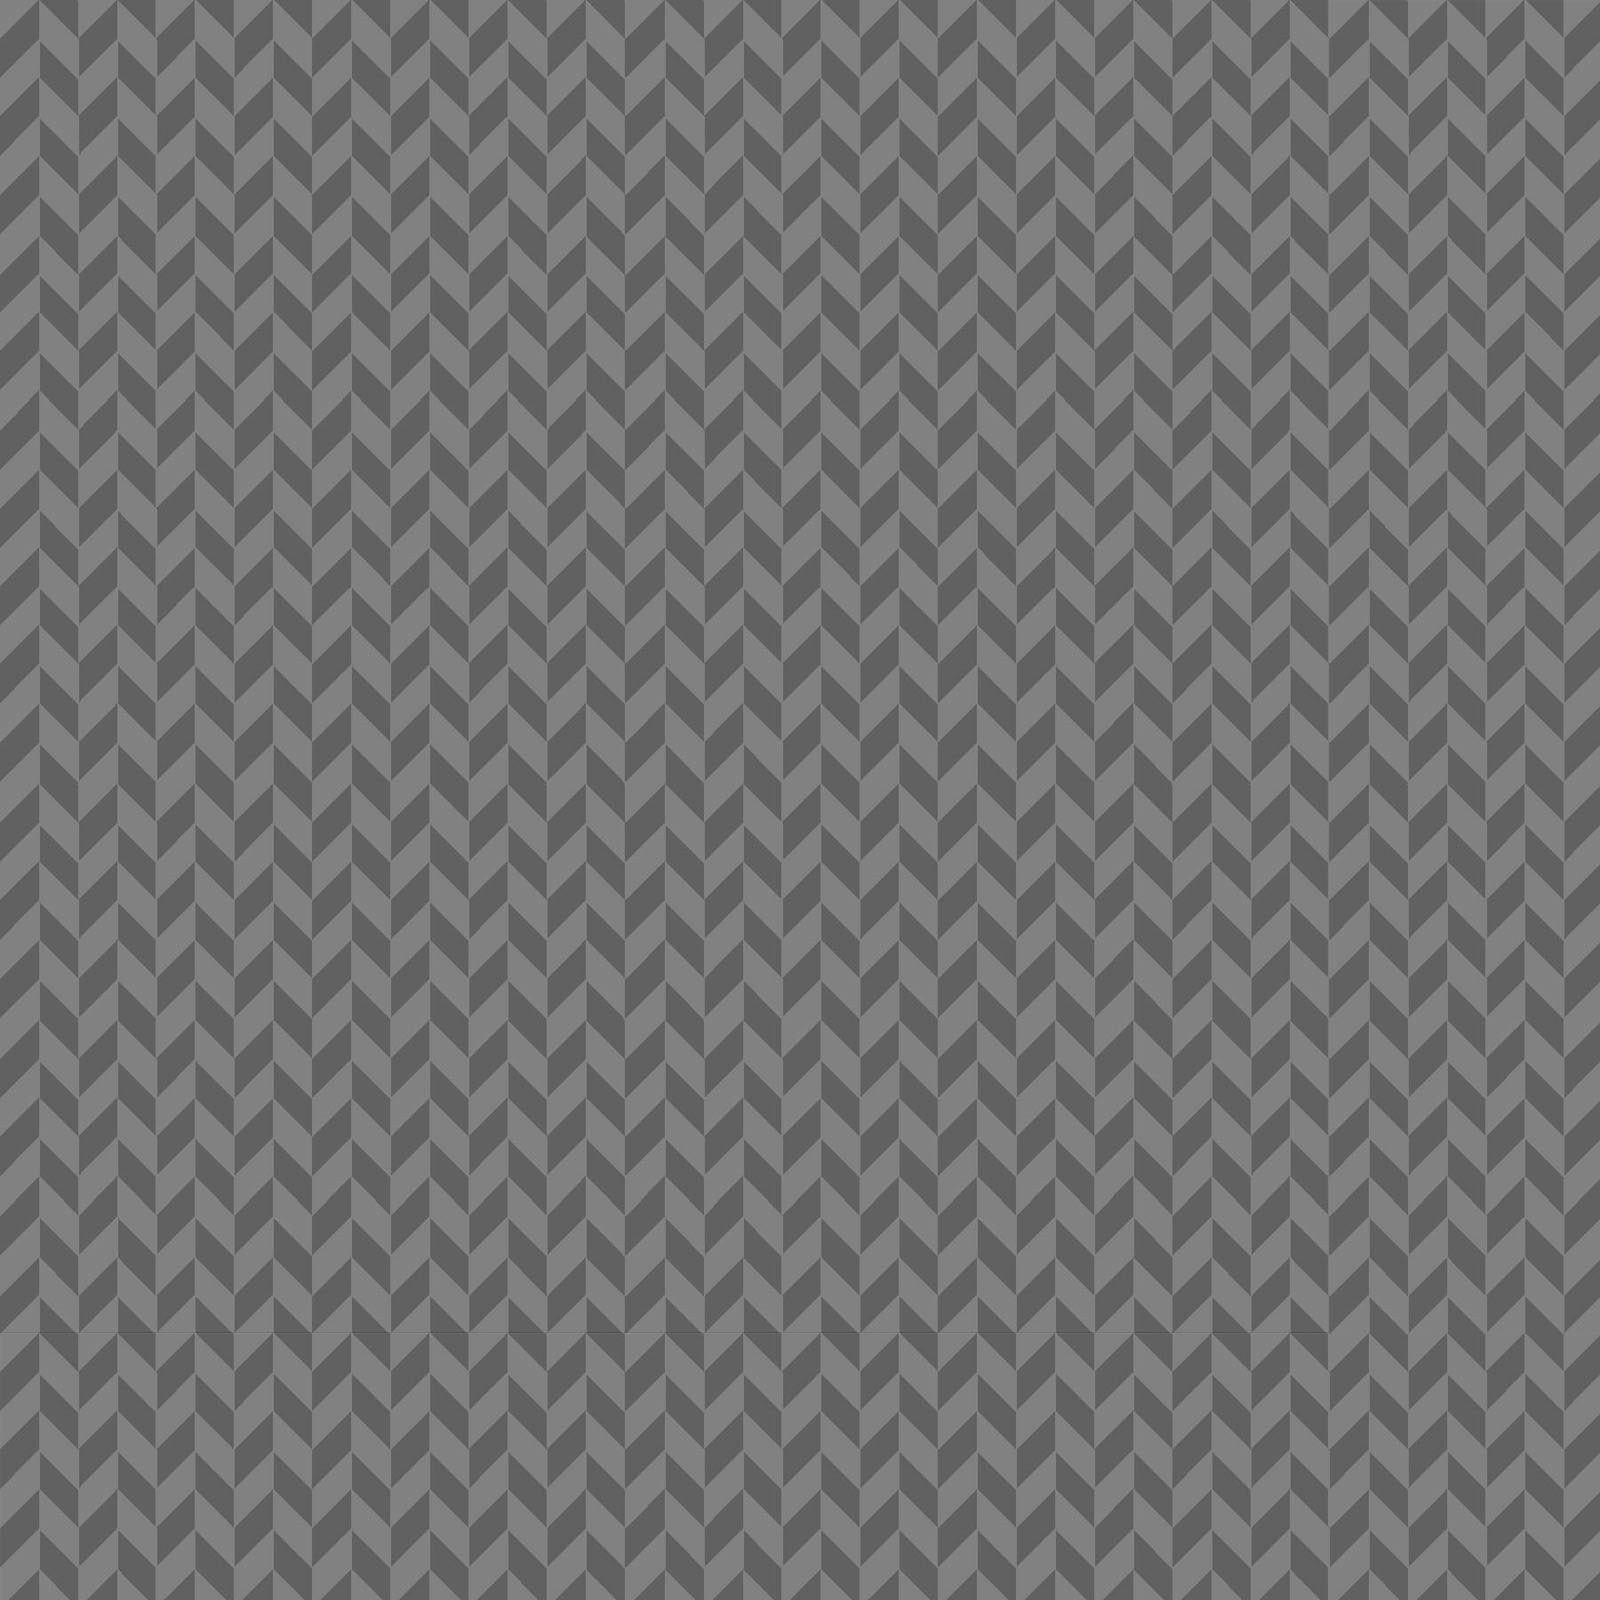 Herringbone in gray (MAS9397-K) is part of the Kimberbell Basics line designed by Kim Christopherson for Maywood Studio. This fabric features a two-tone gray herringbone and adds a sophisticated texture to projects.